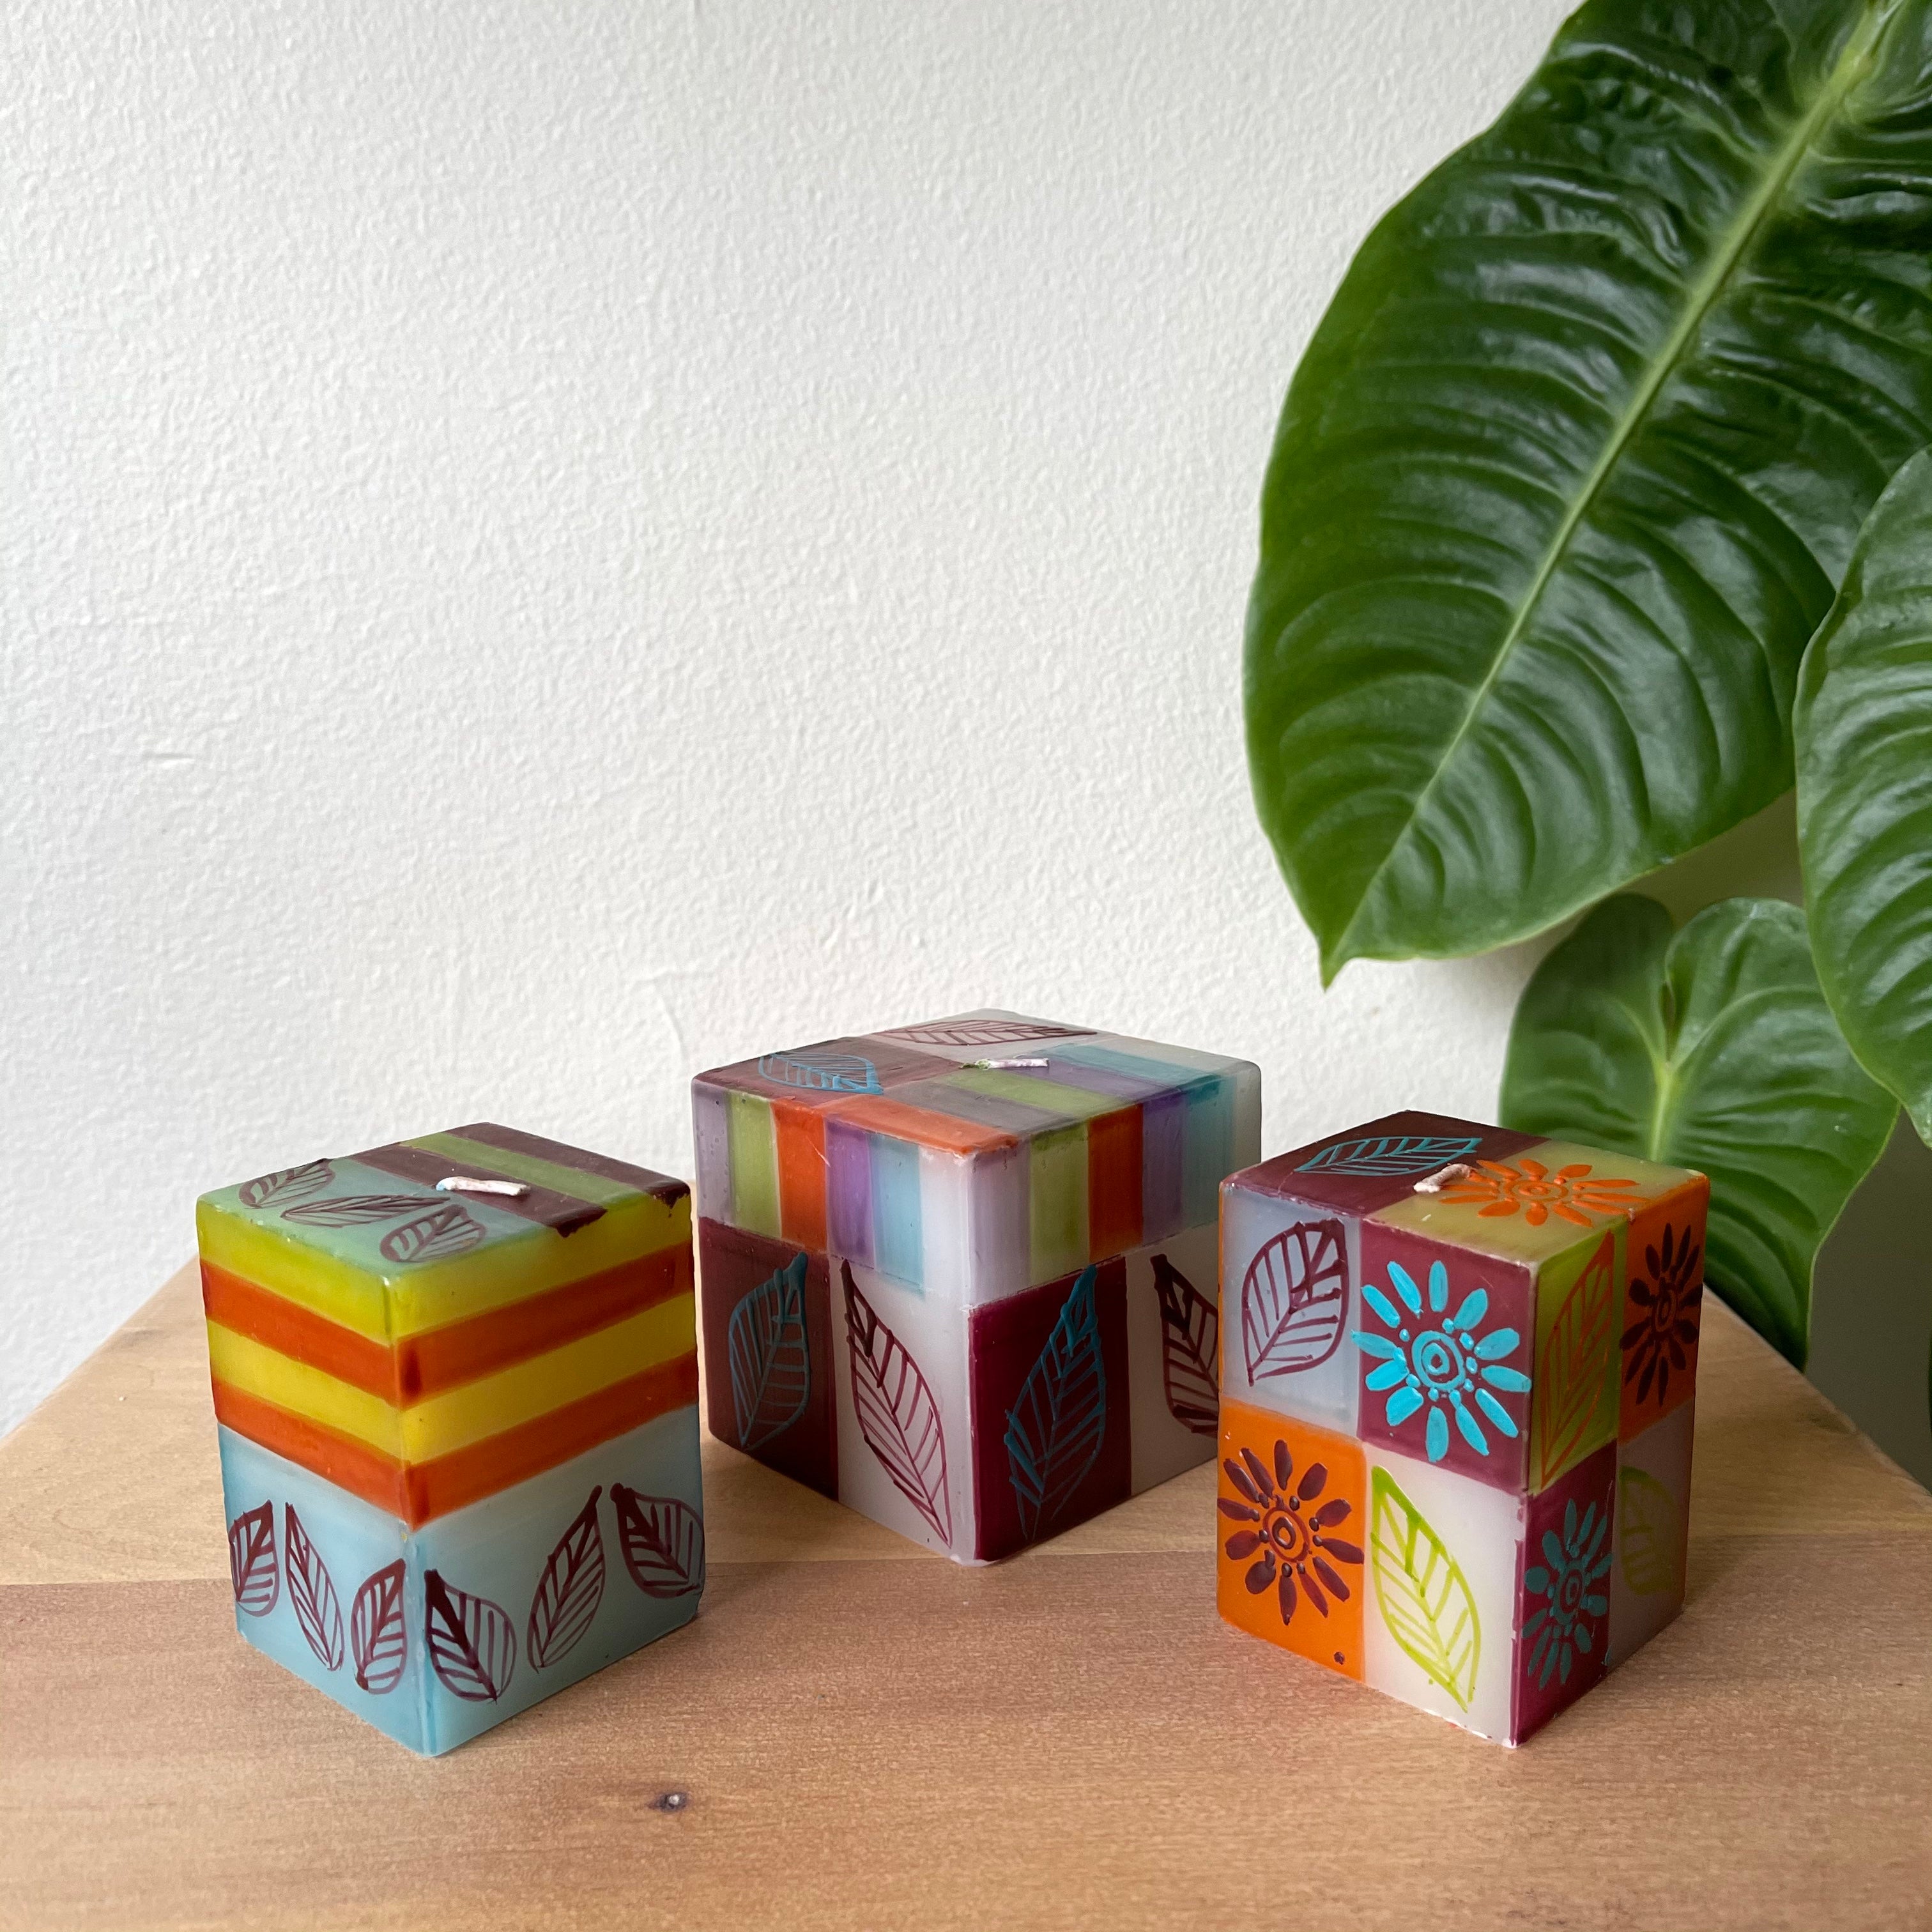 Magic Garden candle collection 2/ 2x2x3 cube candles and 1/ 3x3x3 cube candle.  Painted with a floral design in turquoise, maroon, green, yellow, and orange. Fair Trade home decor. 